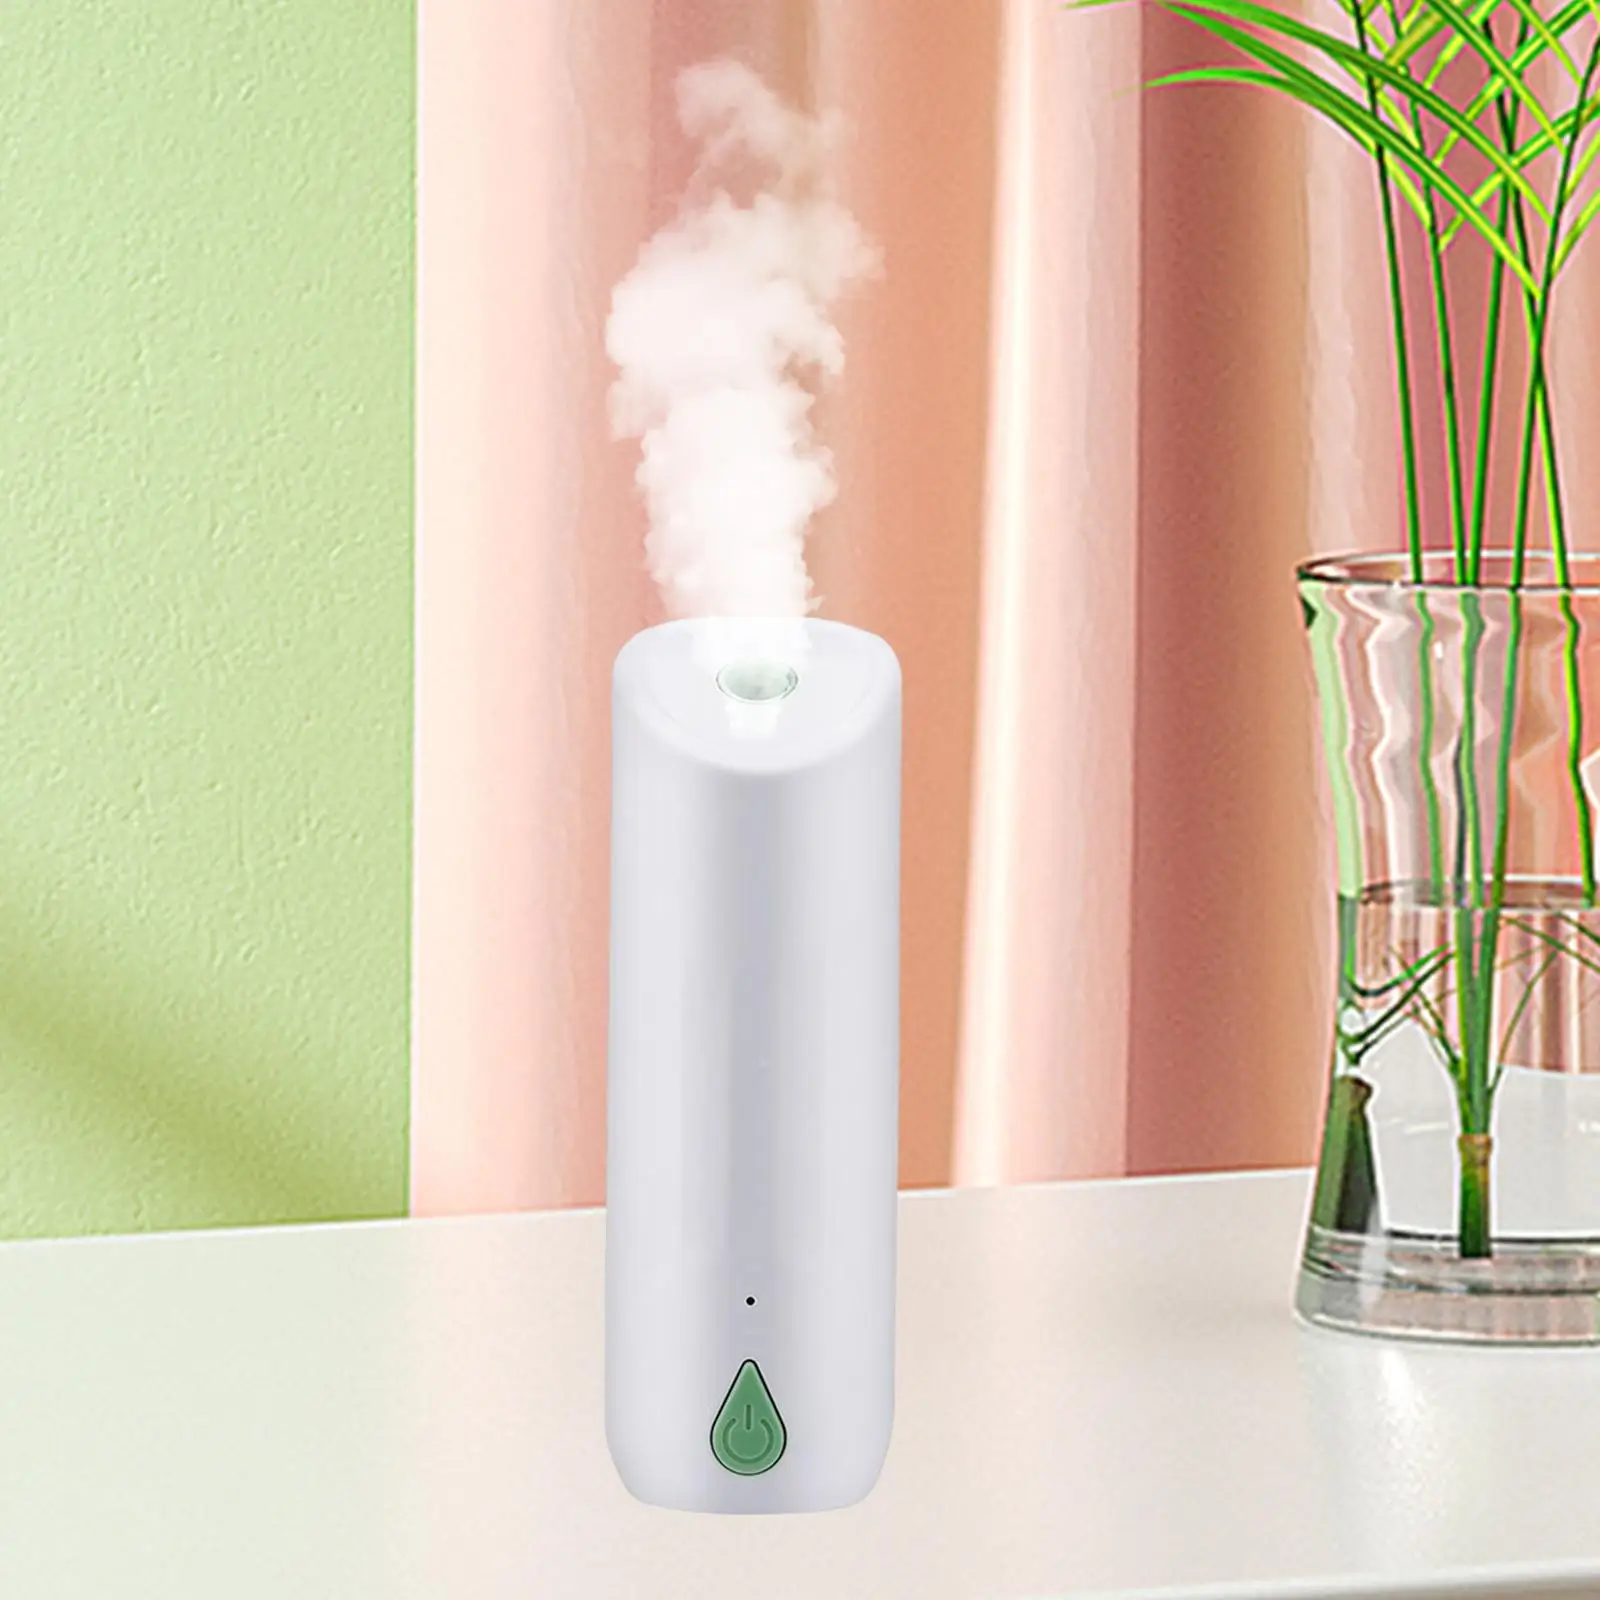 Fragrance Diffuser Spray Dispenser Mini Air Humidifier Wall Mounted/Free Standing Mist Sprayer Noiseless for Hotel Office Home